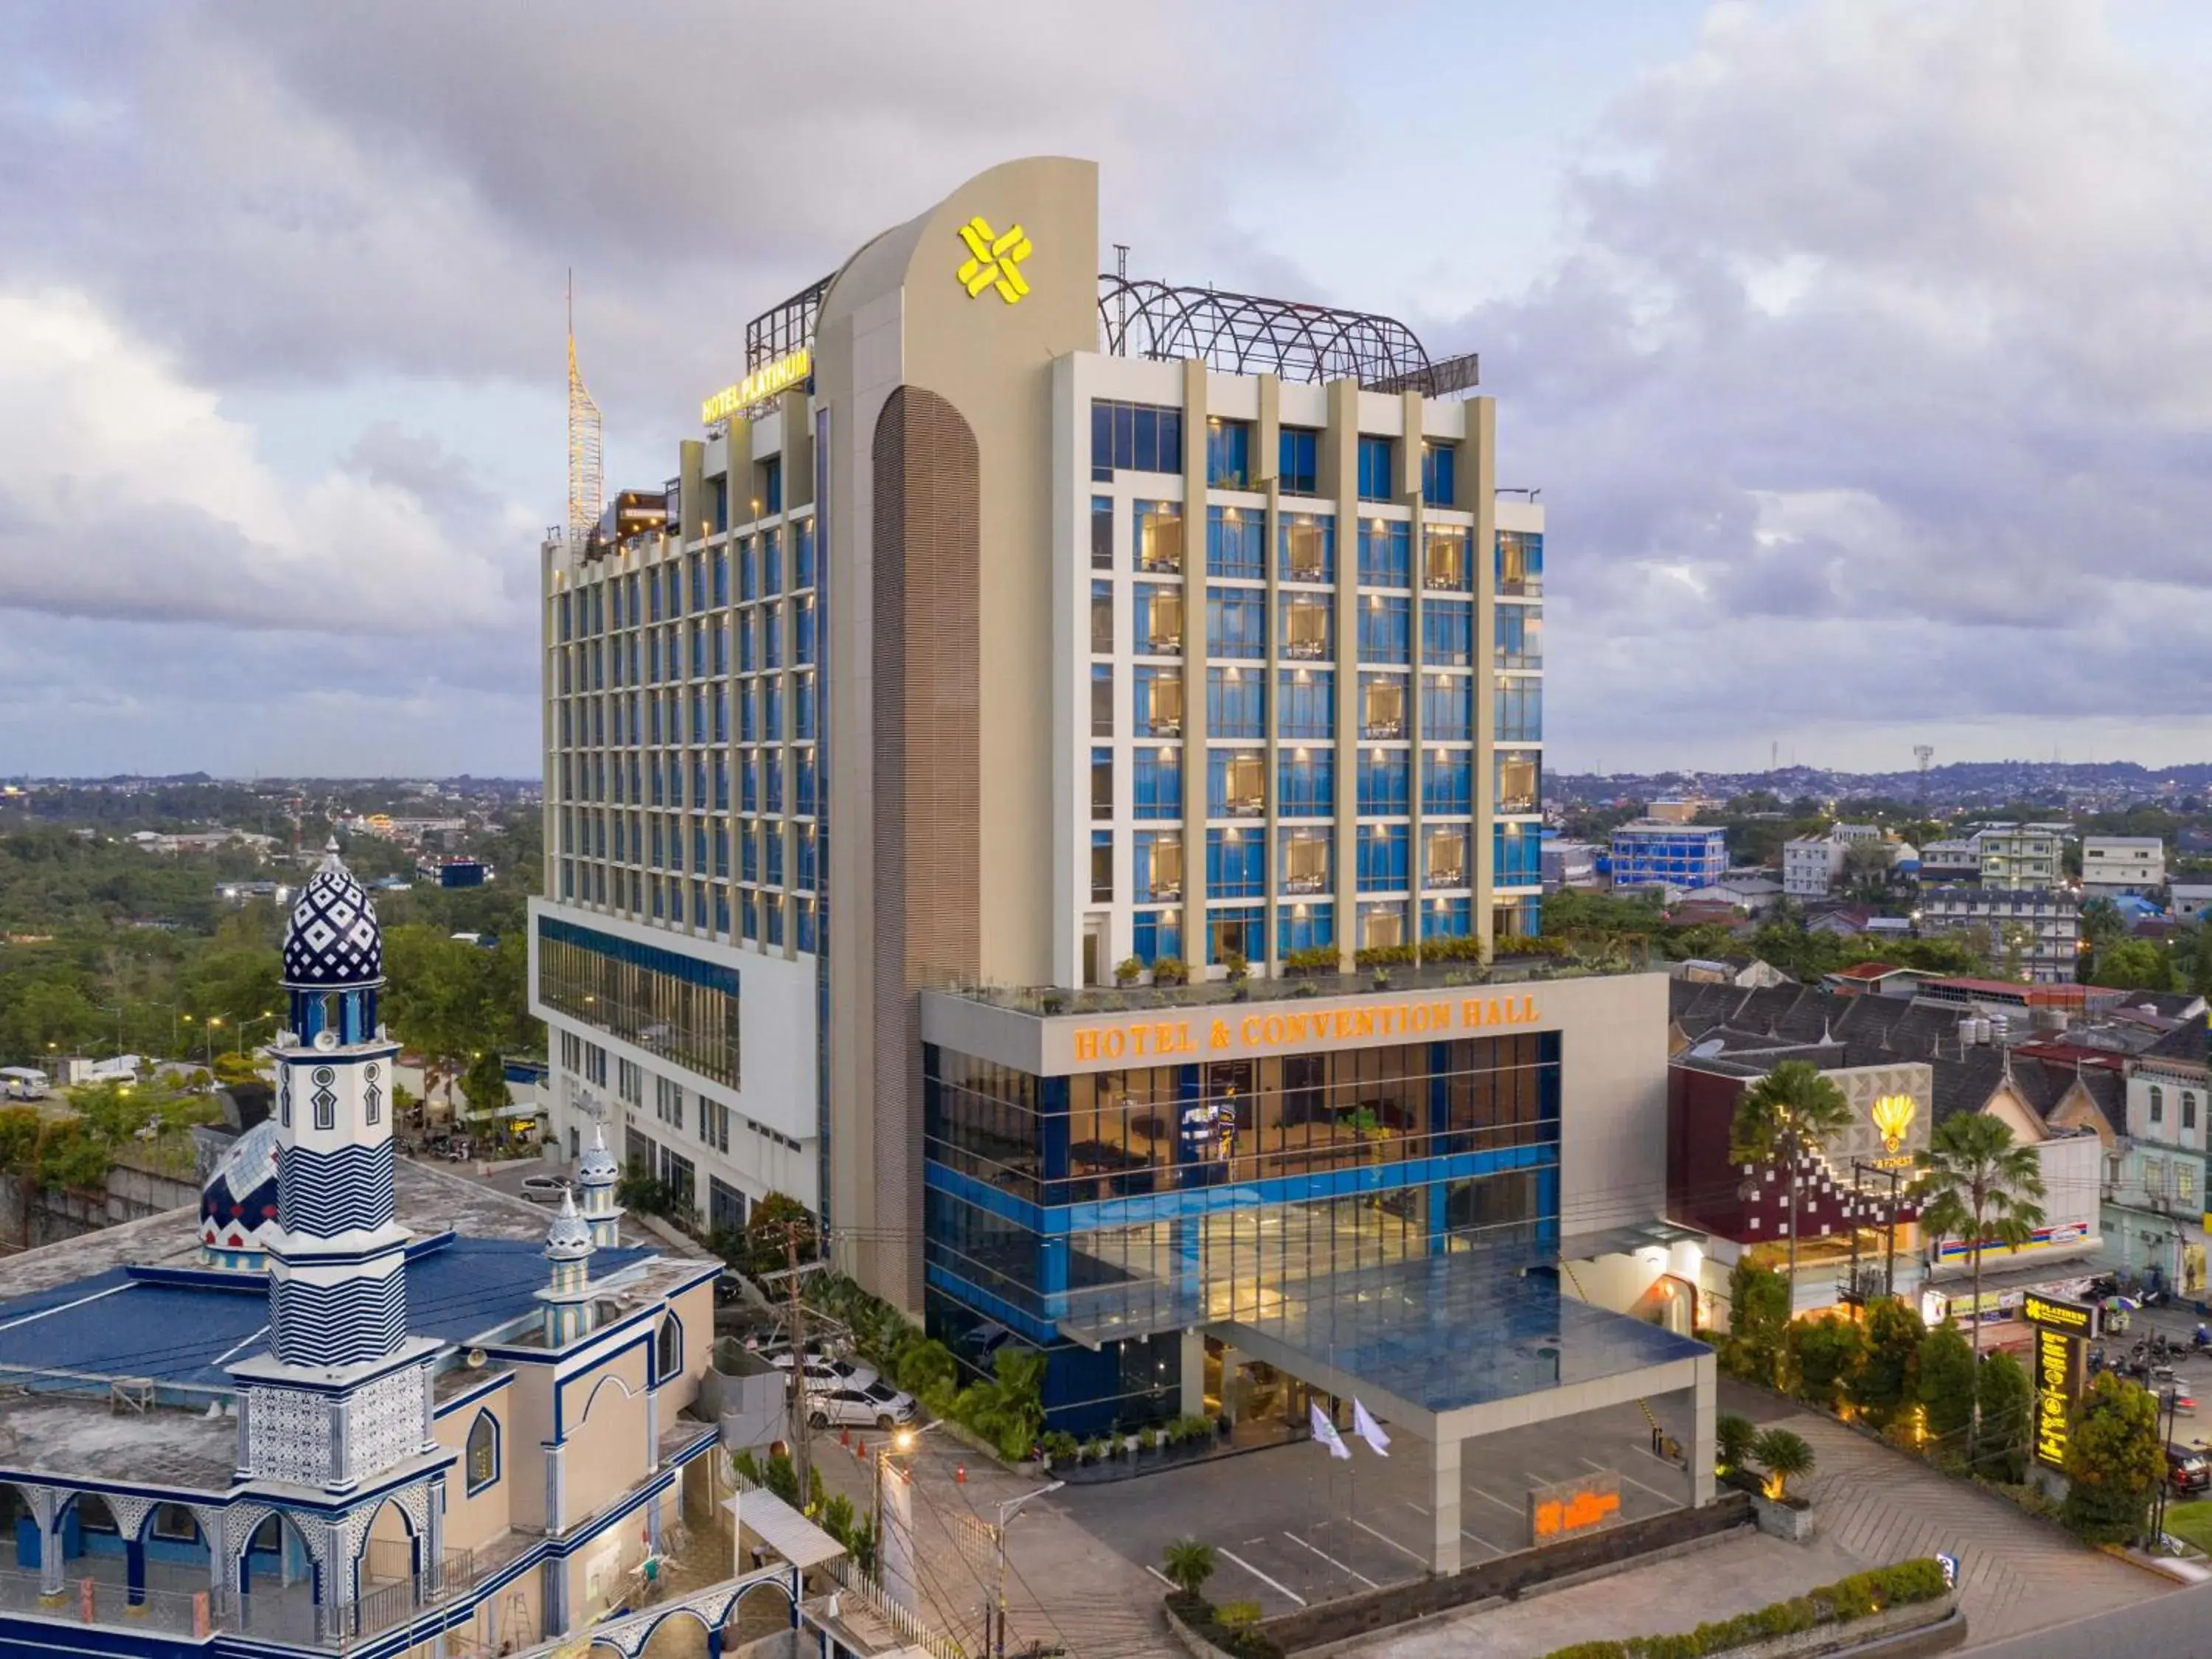 Property building in Platinum Hotel & Convention Hall Balikpapan